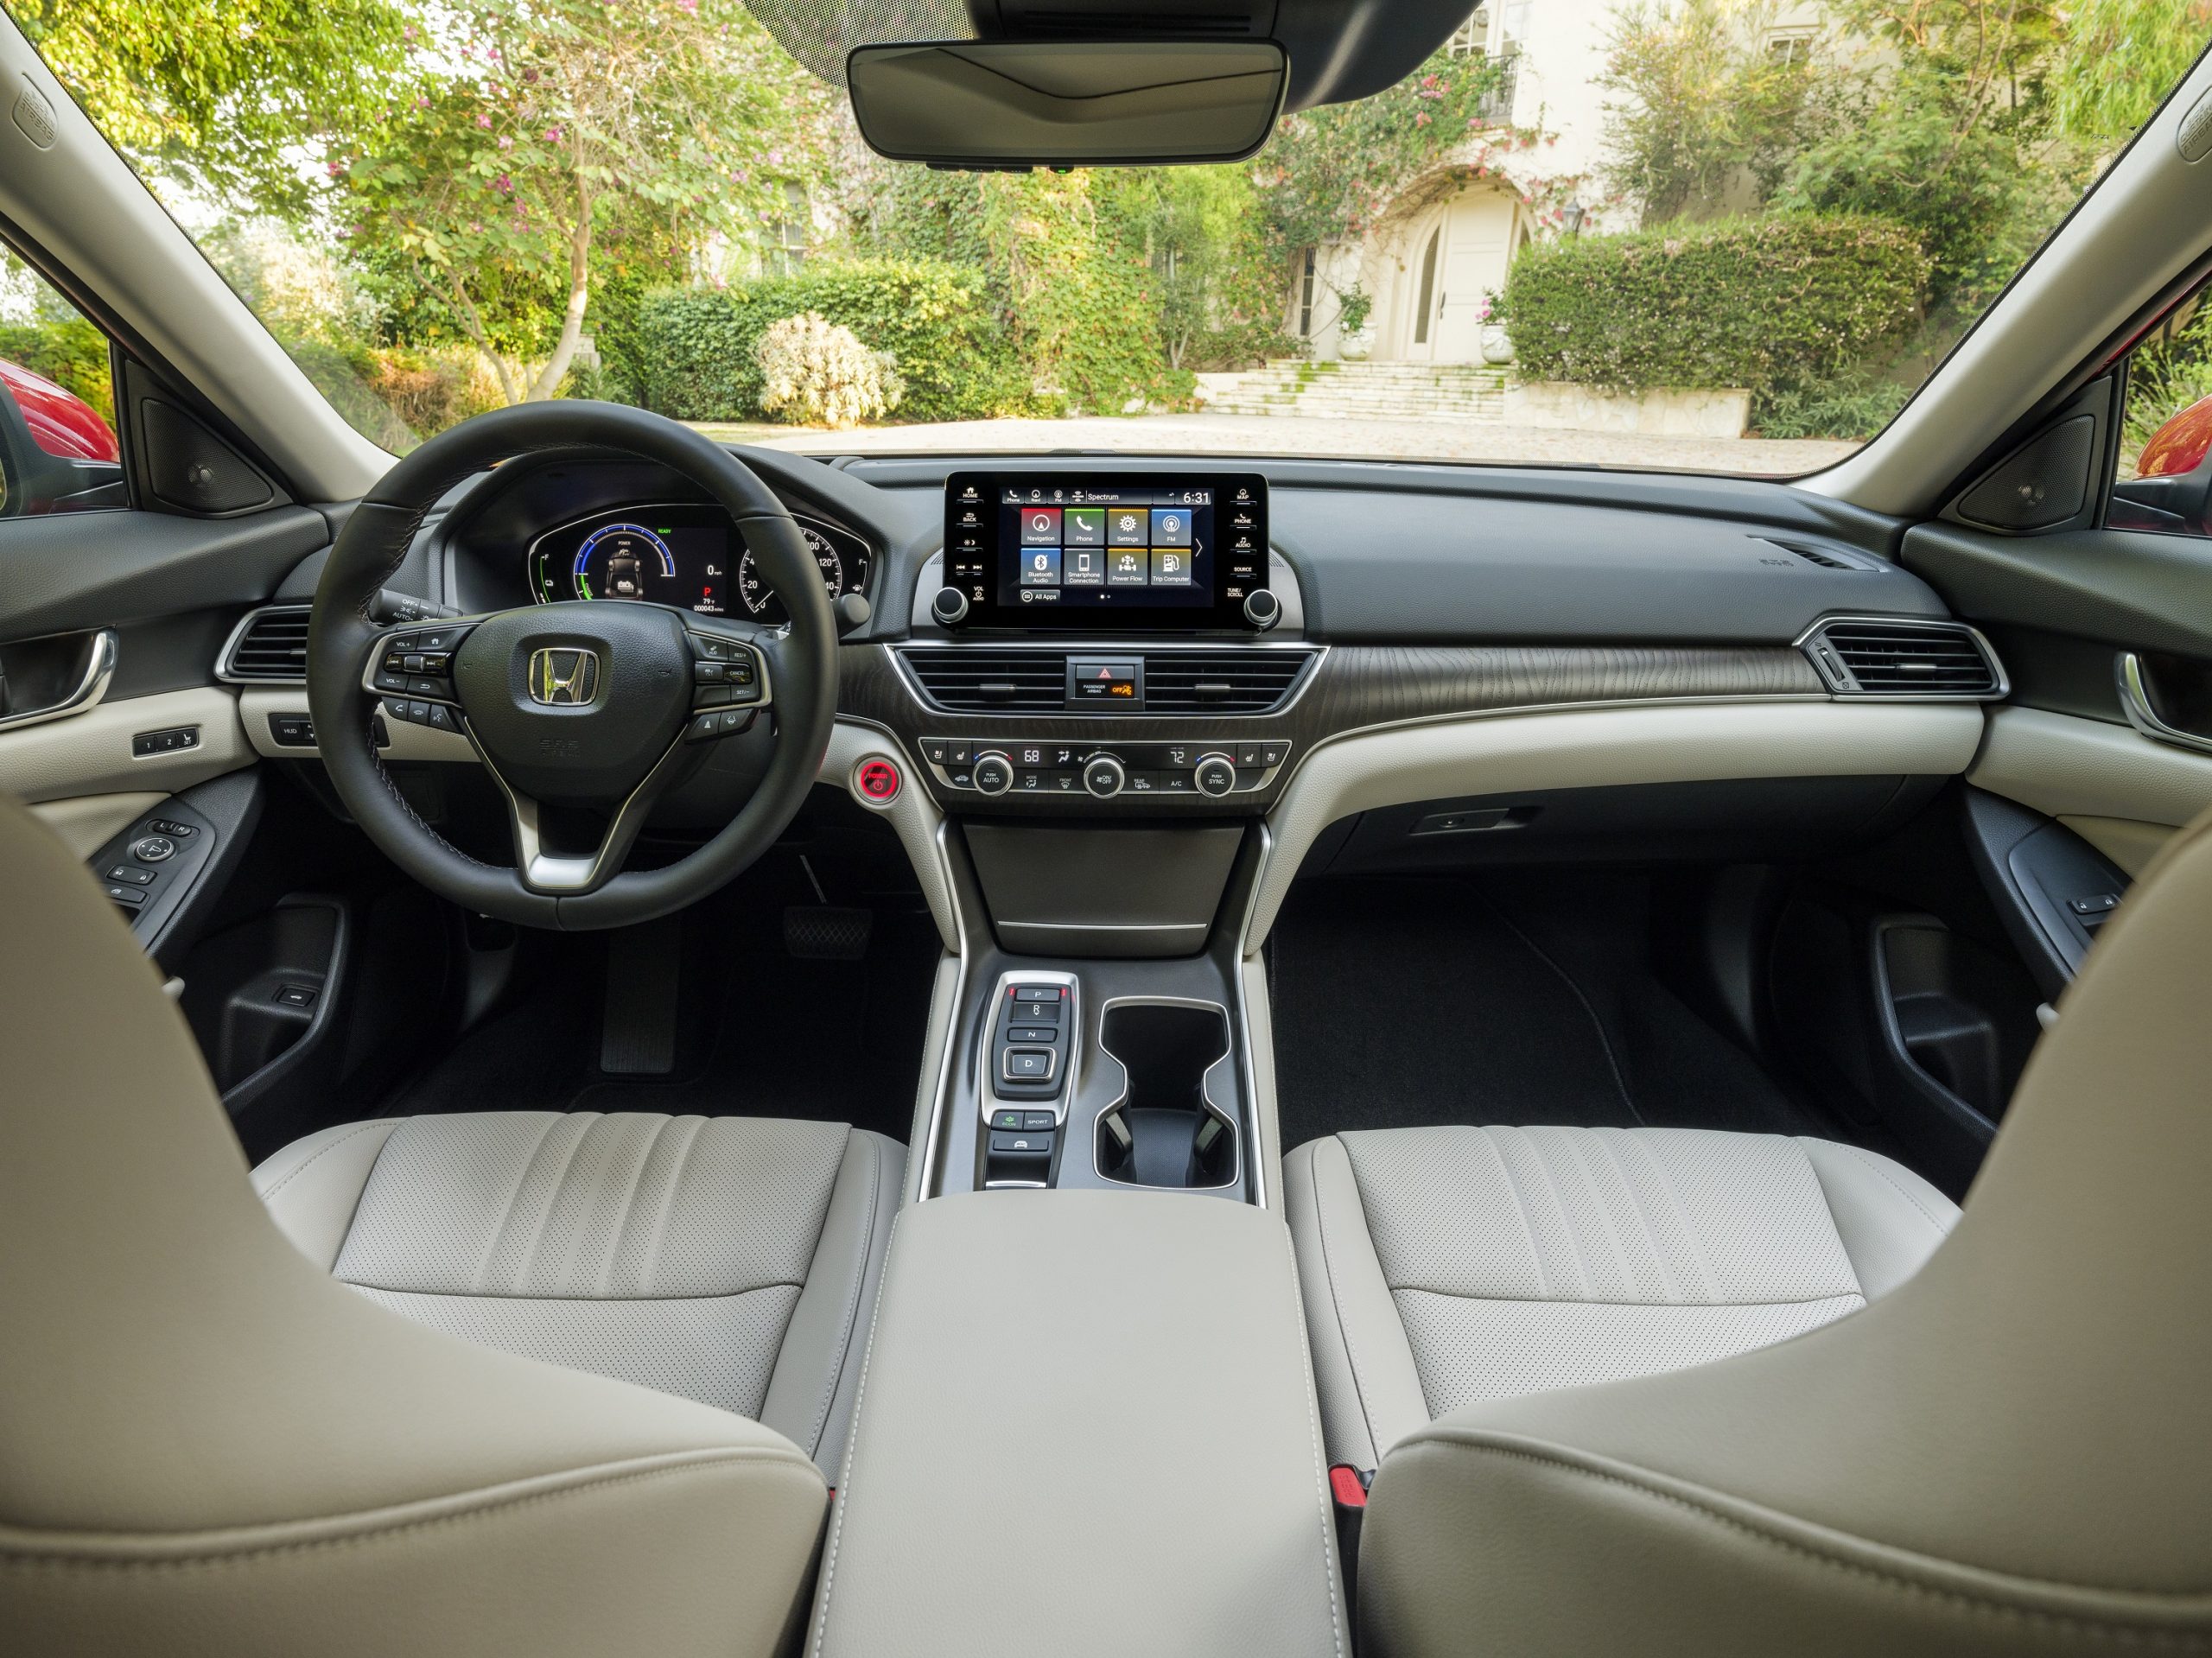 The cream-colored interior of the 2022 Honda Accord sedan, shot from between the front seats facing forwards